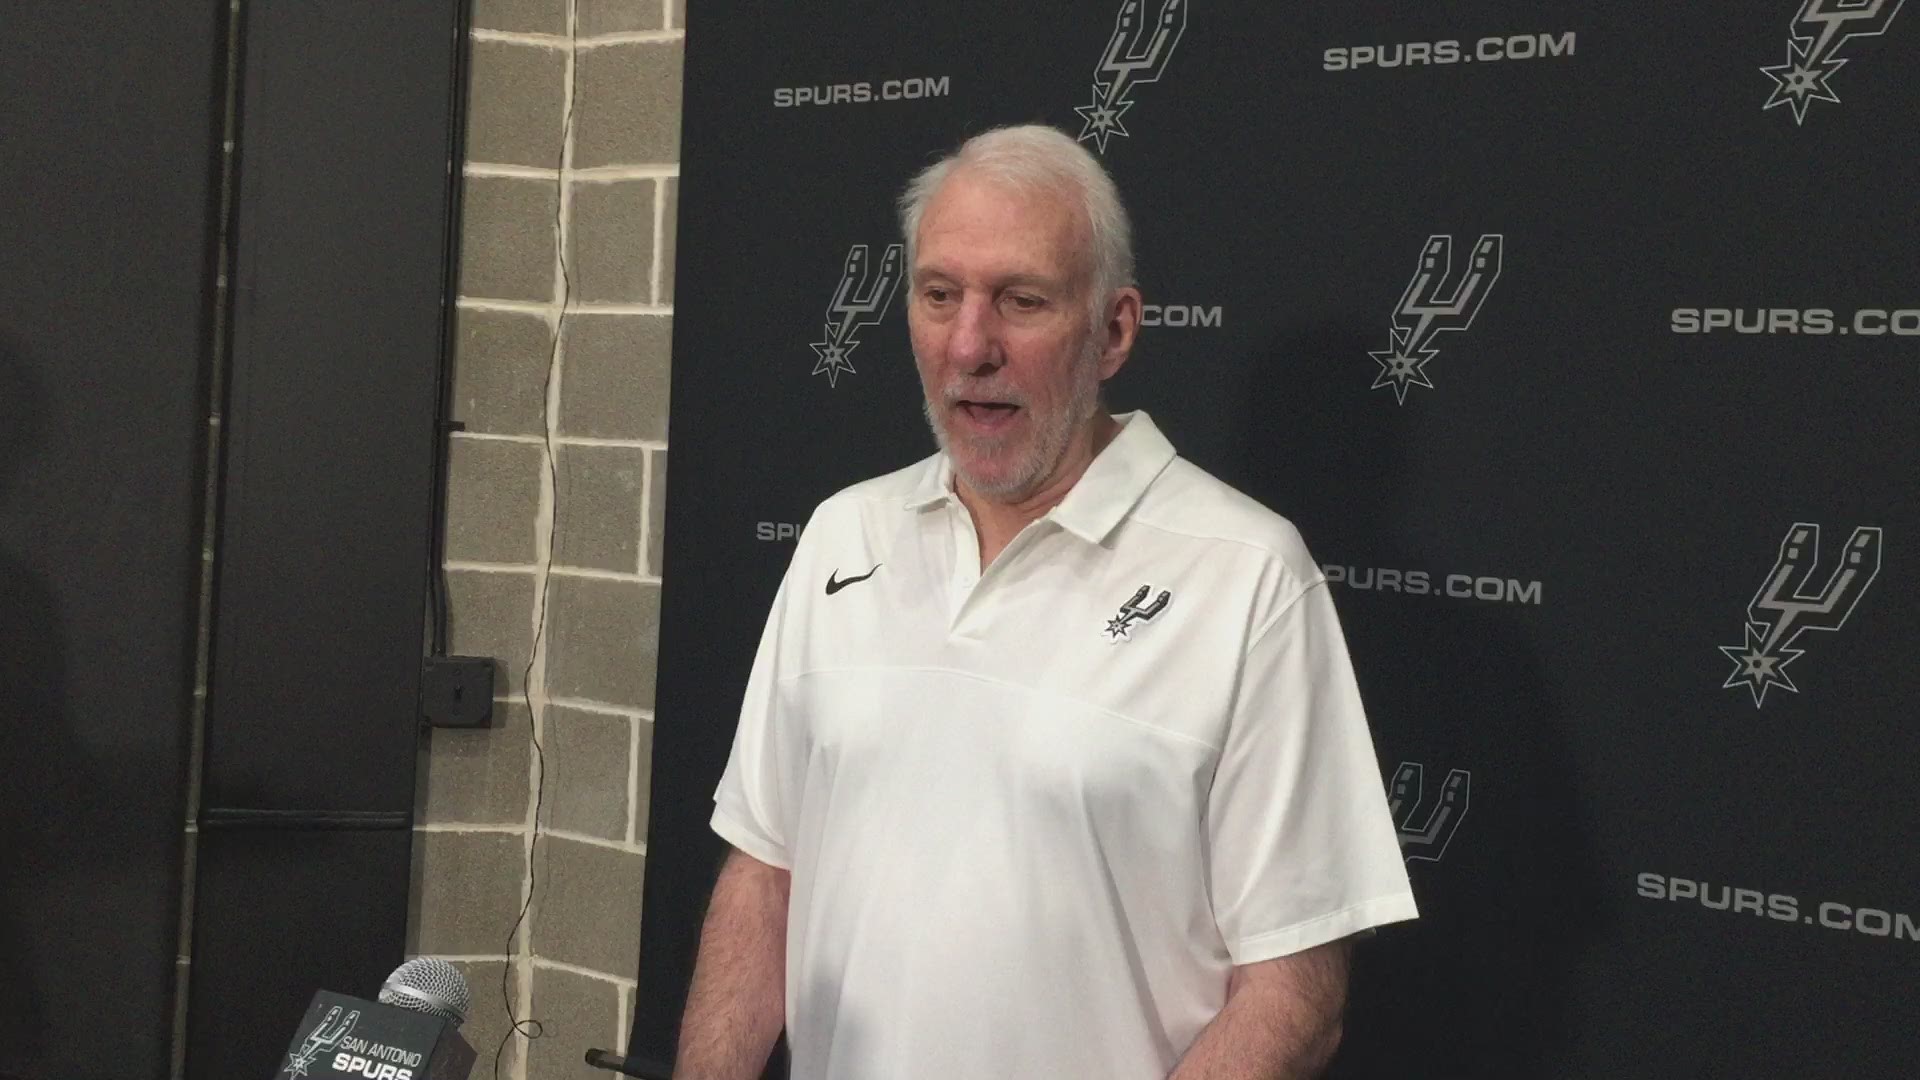 Pop on dealing with life's ups and downs